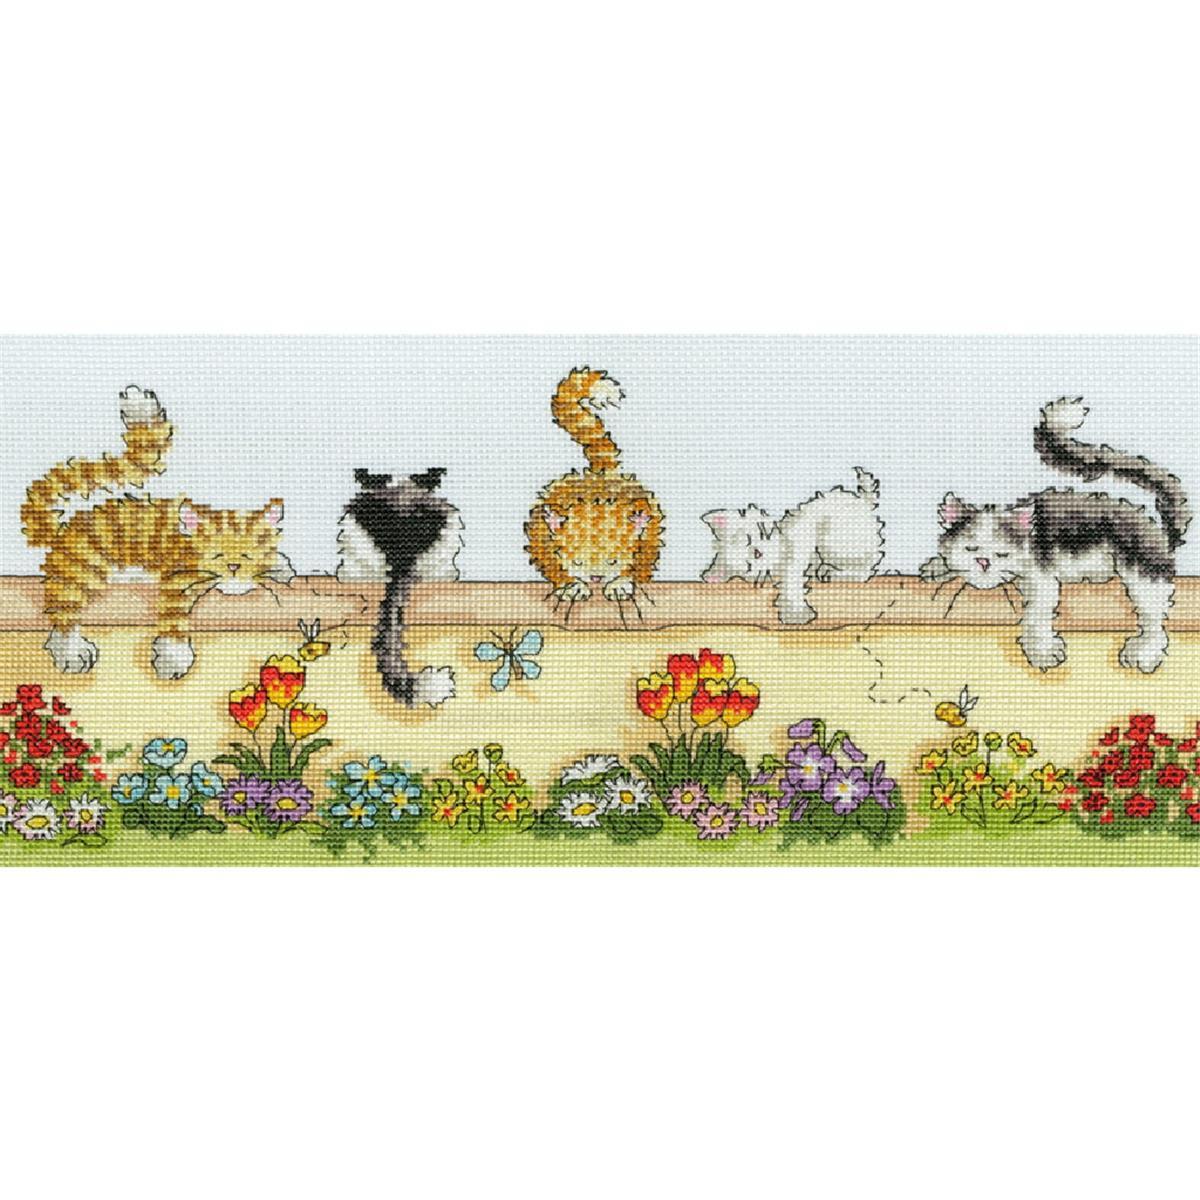 Five cats are resting on a beige wall decorated with...